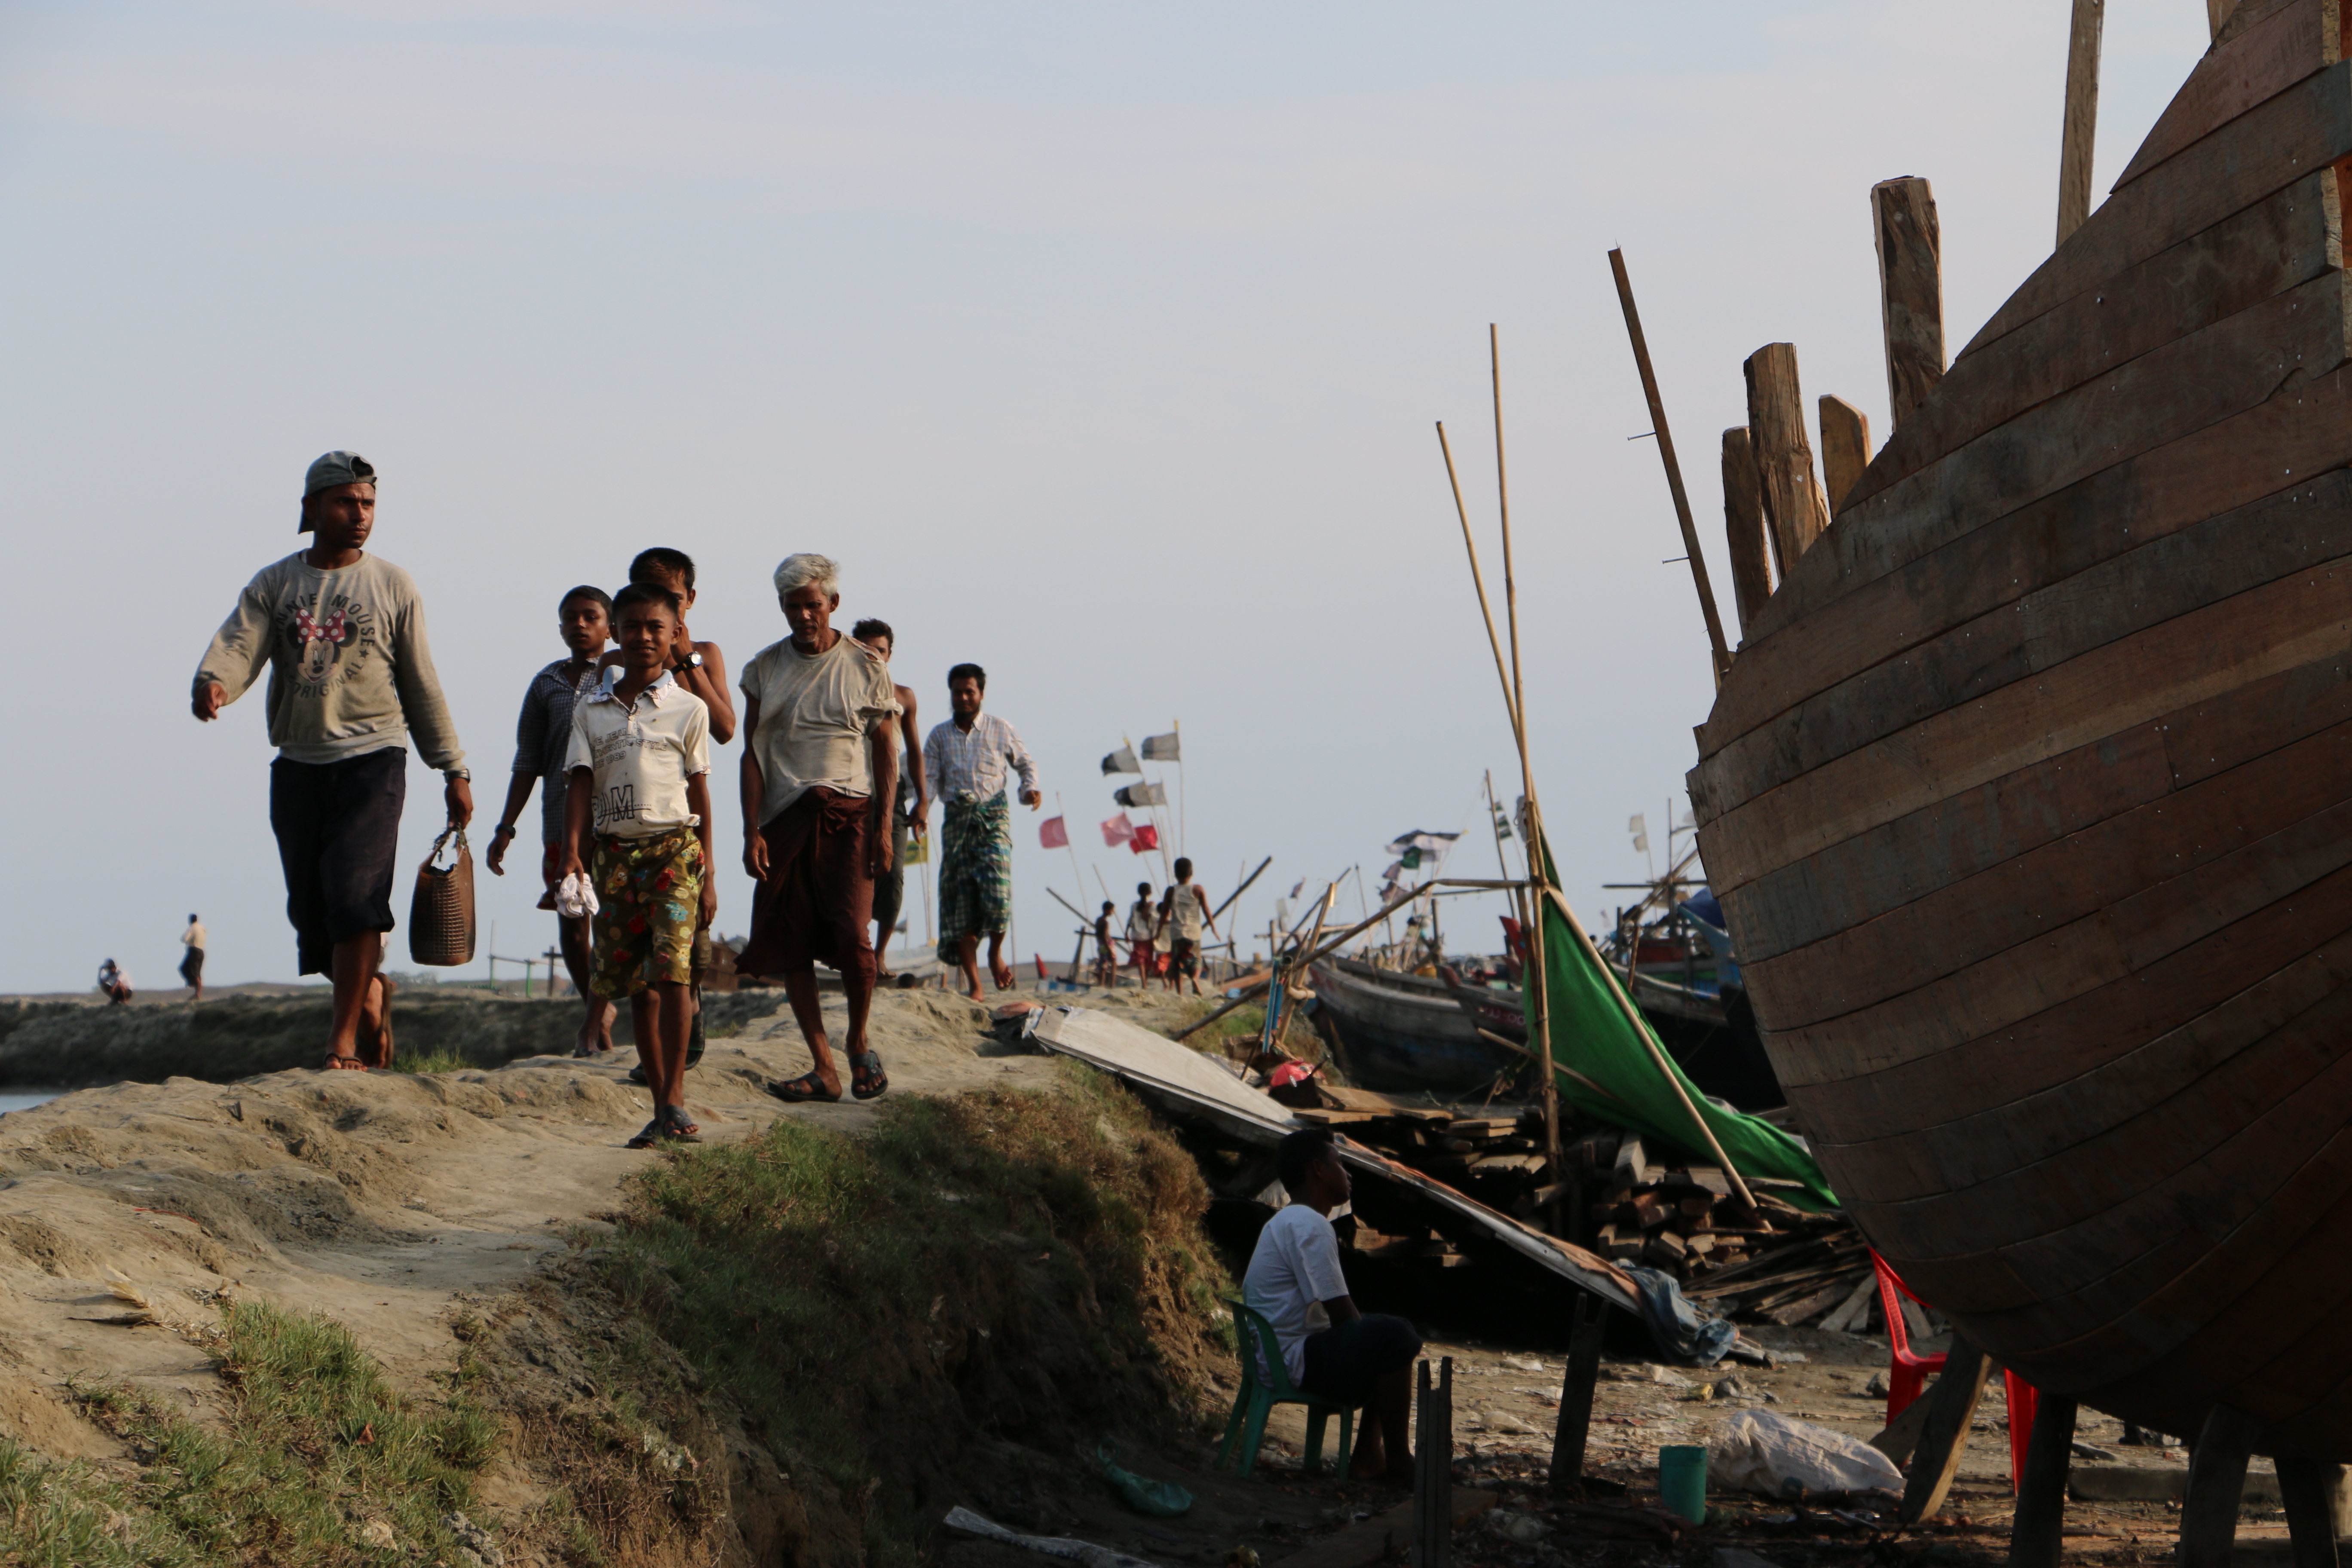 Rohingyas in Rakhine State in 2014. Photo: Flickr / United to End Genocide